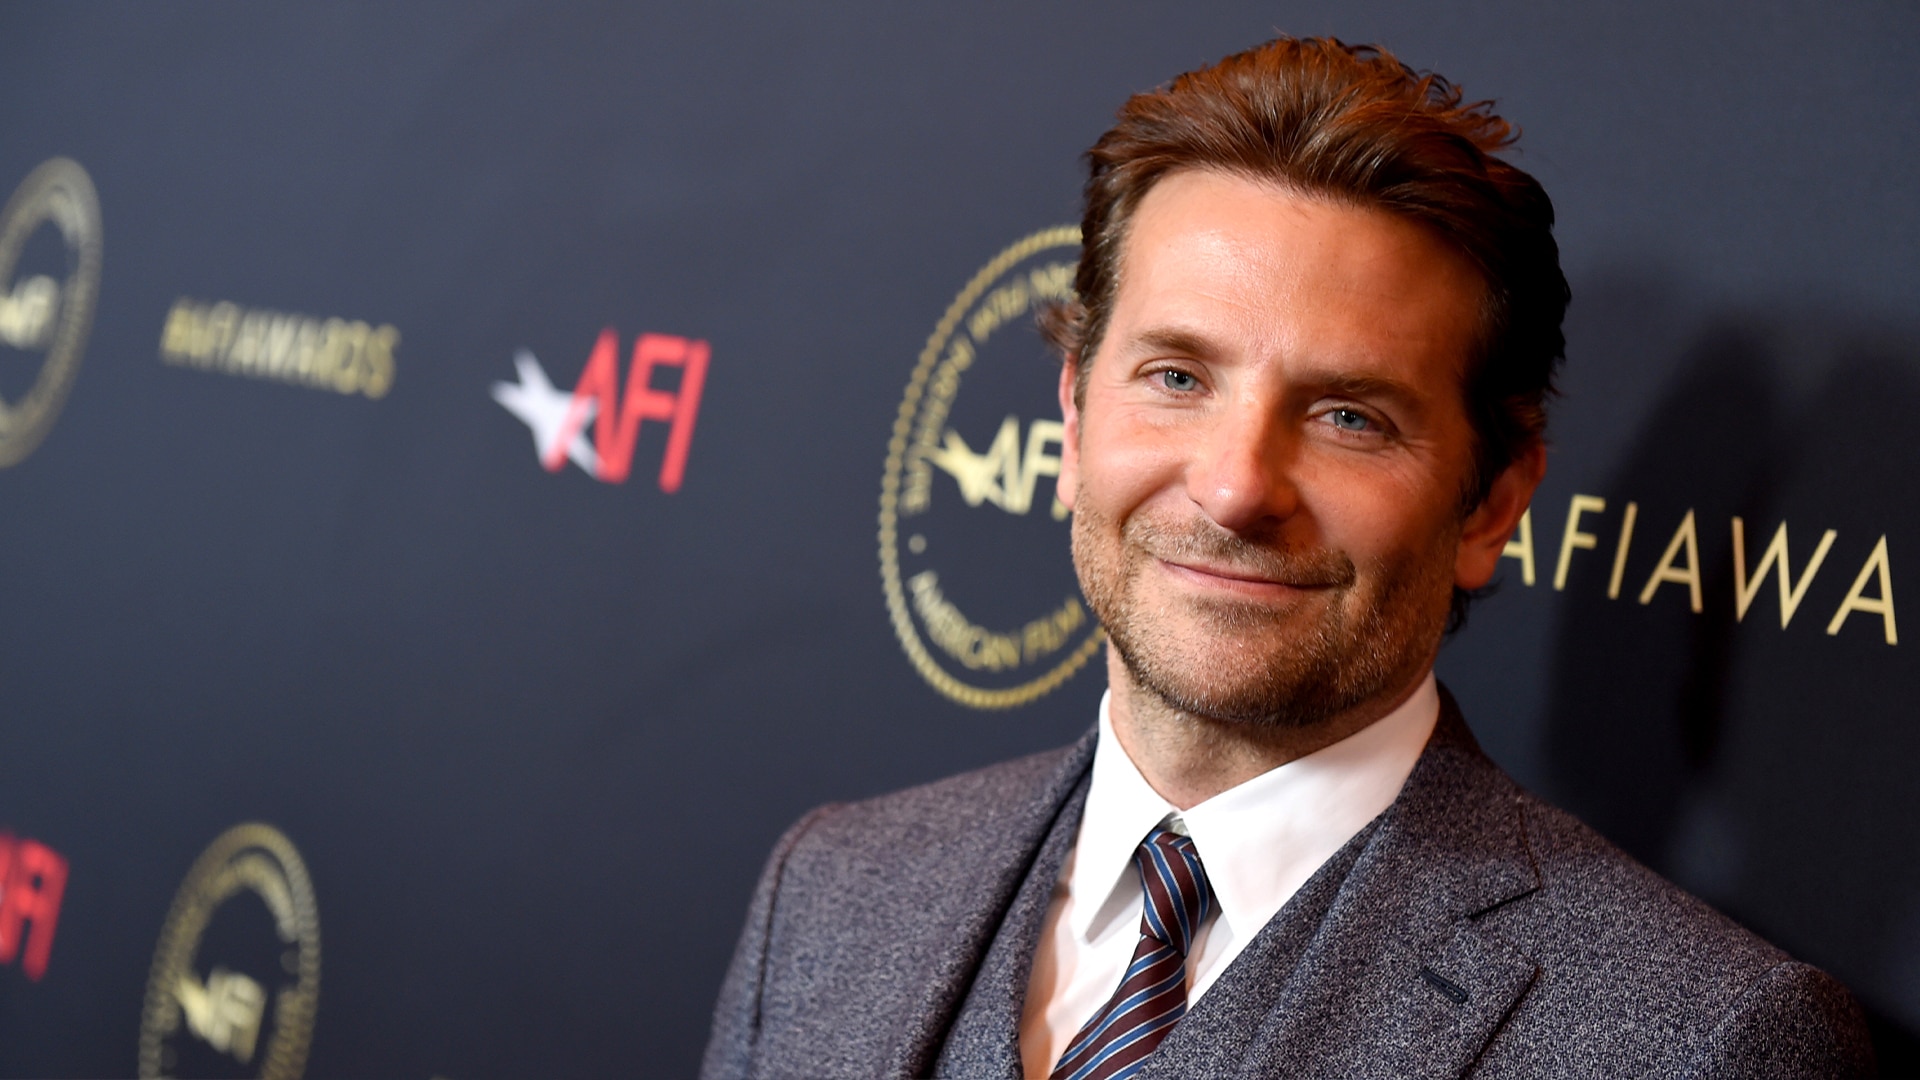 Bradley Cooper Reveals His Shaved Head While on a Phone Call in N.Y.C.